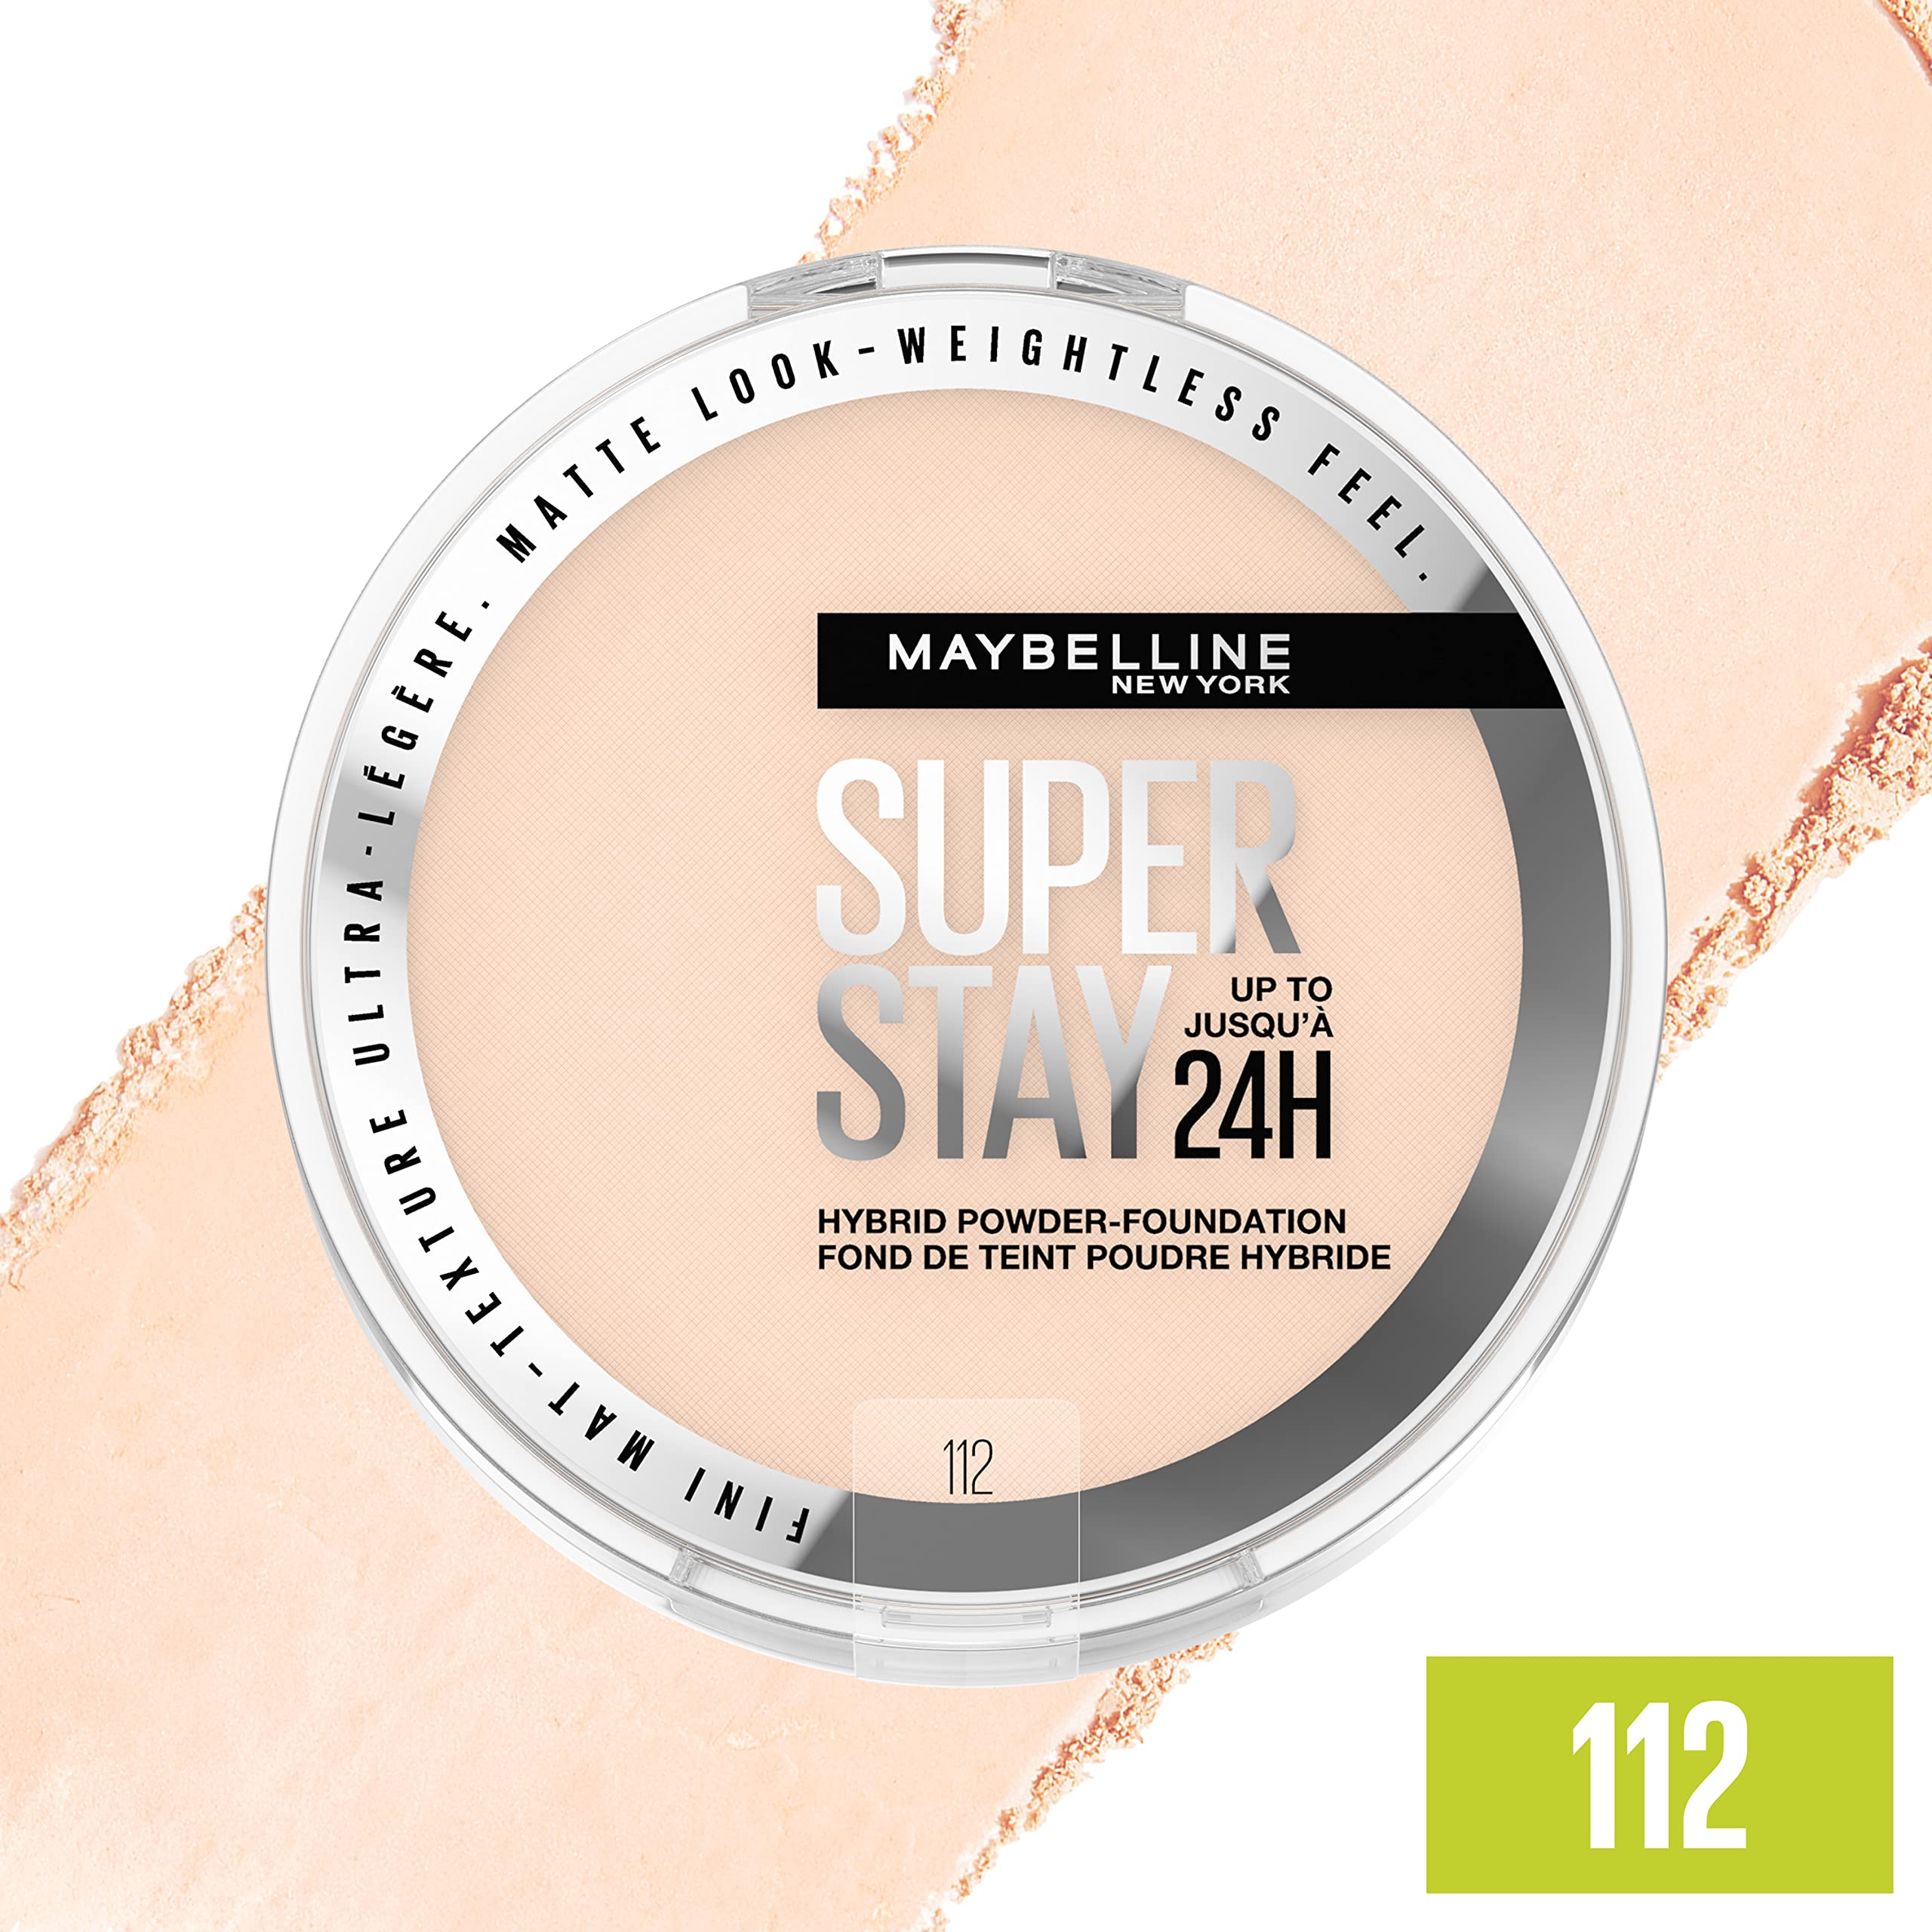 Maybelline New York Super Stay Up to 24HR Hybrid Powder-Foundation, Medium-to-Full Coverage Makeup, Matte Finish, 112, 1 Count